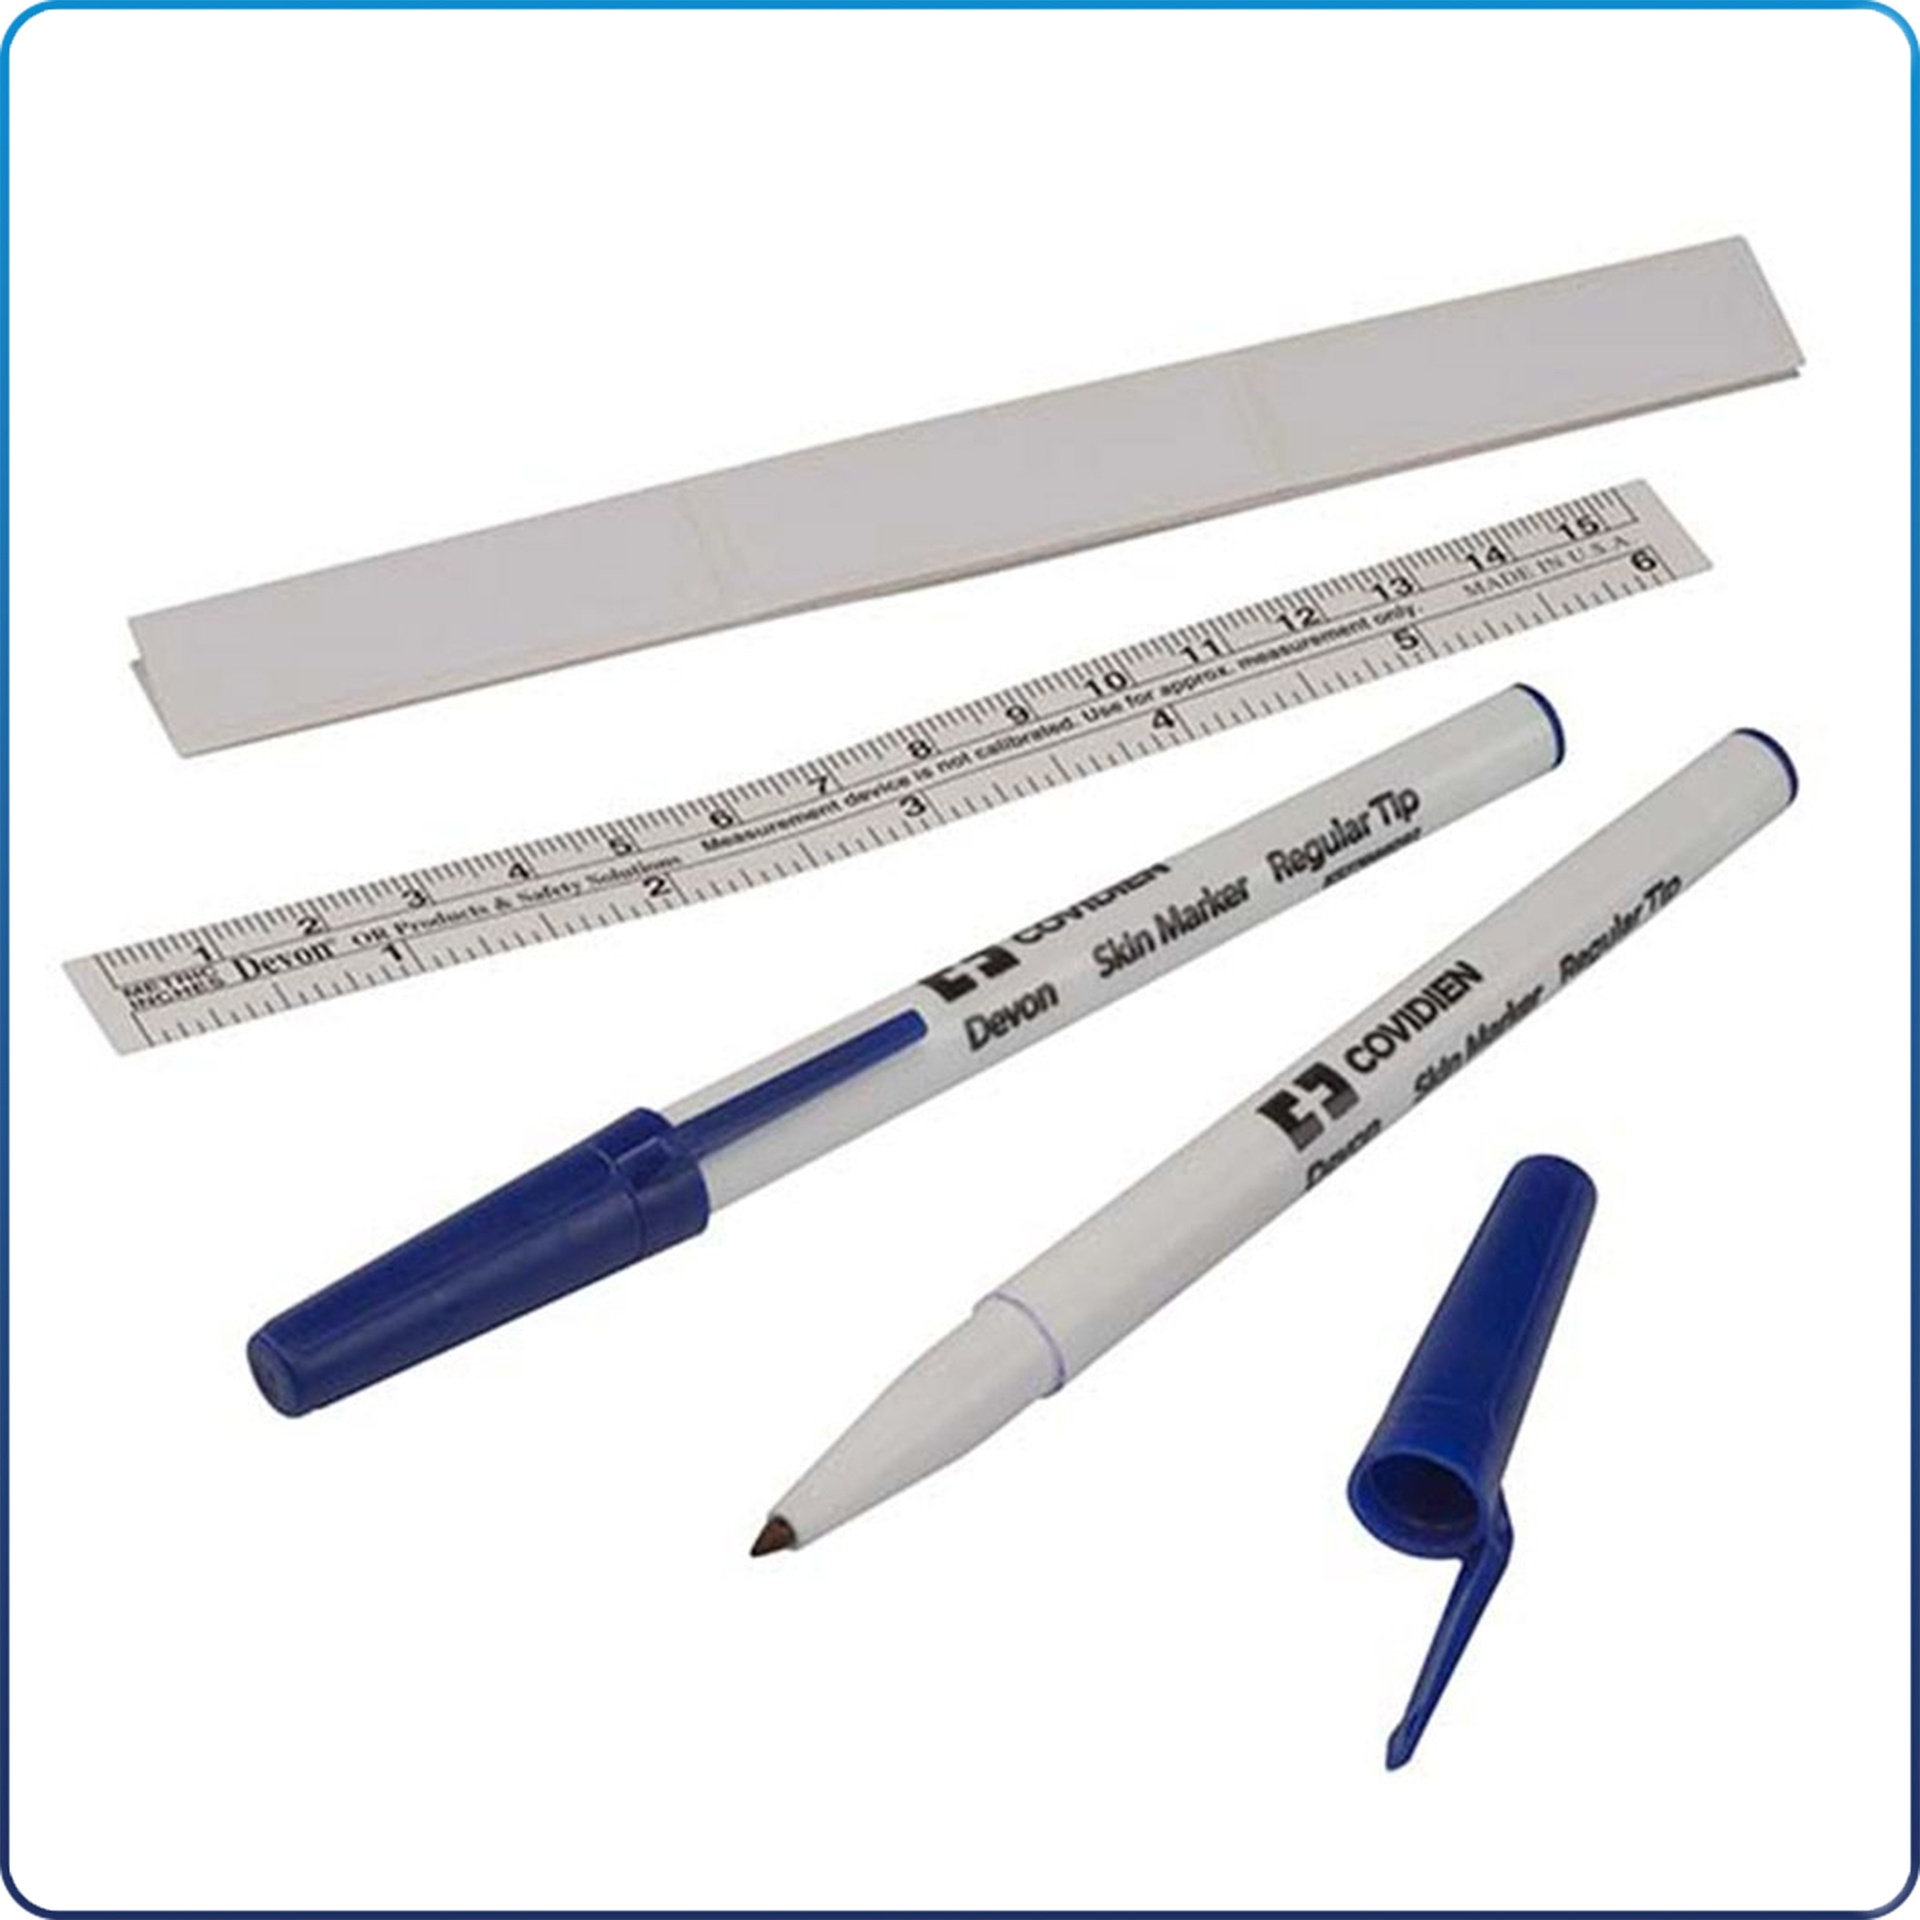 [75685478] Surgical Marking Pen